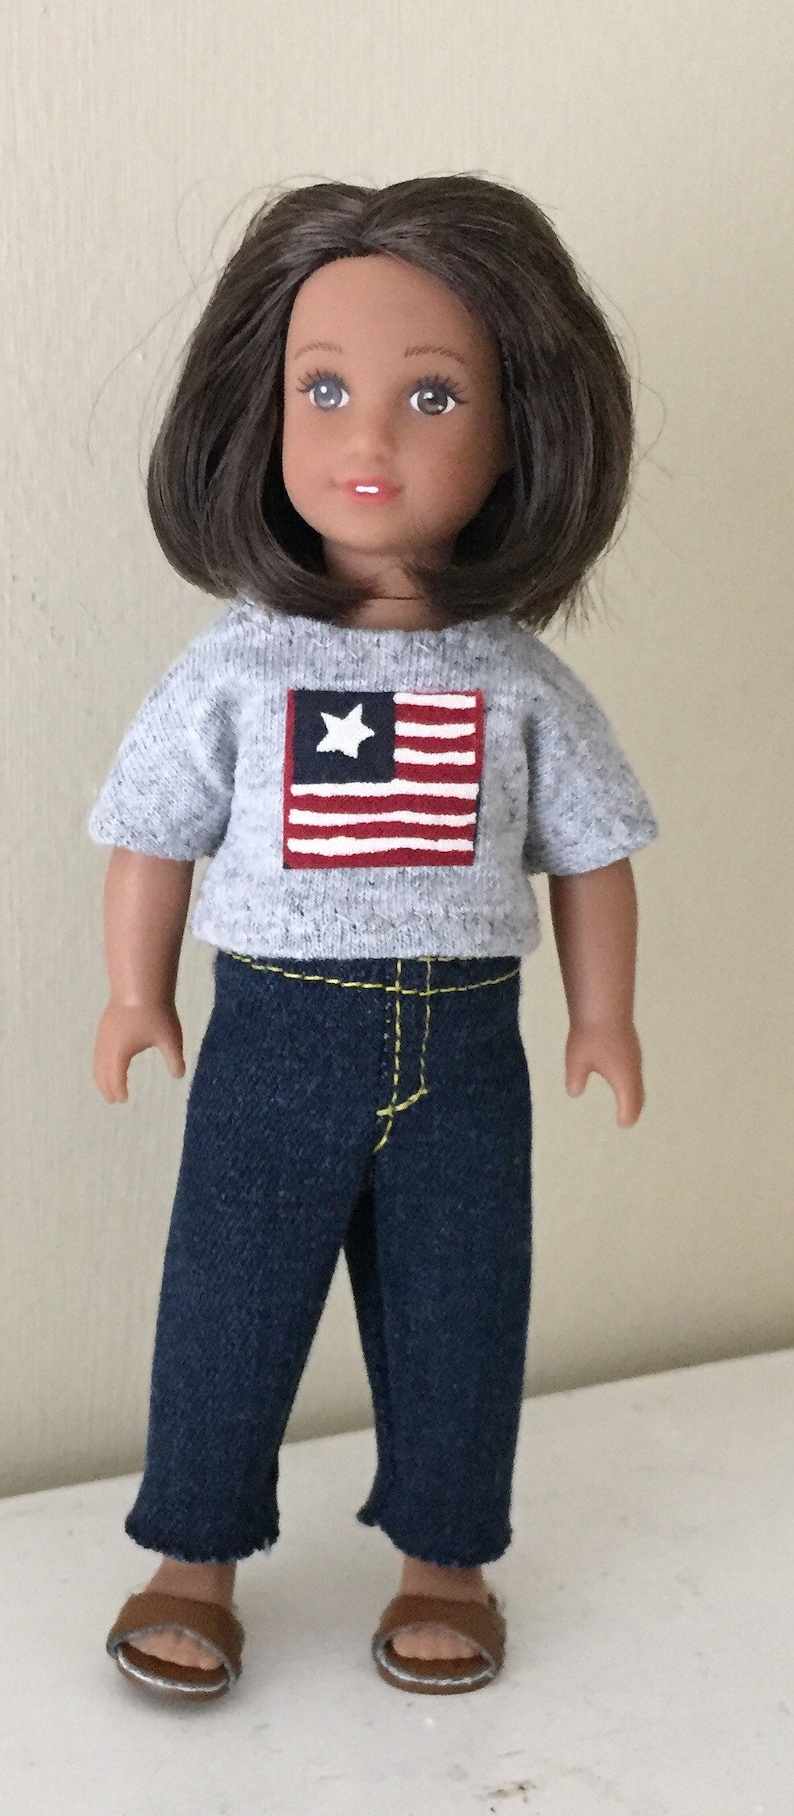 6 inch mini doll clothes: tee shirt with flag and denim jeans 画像 5